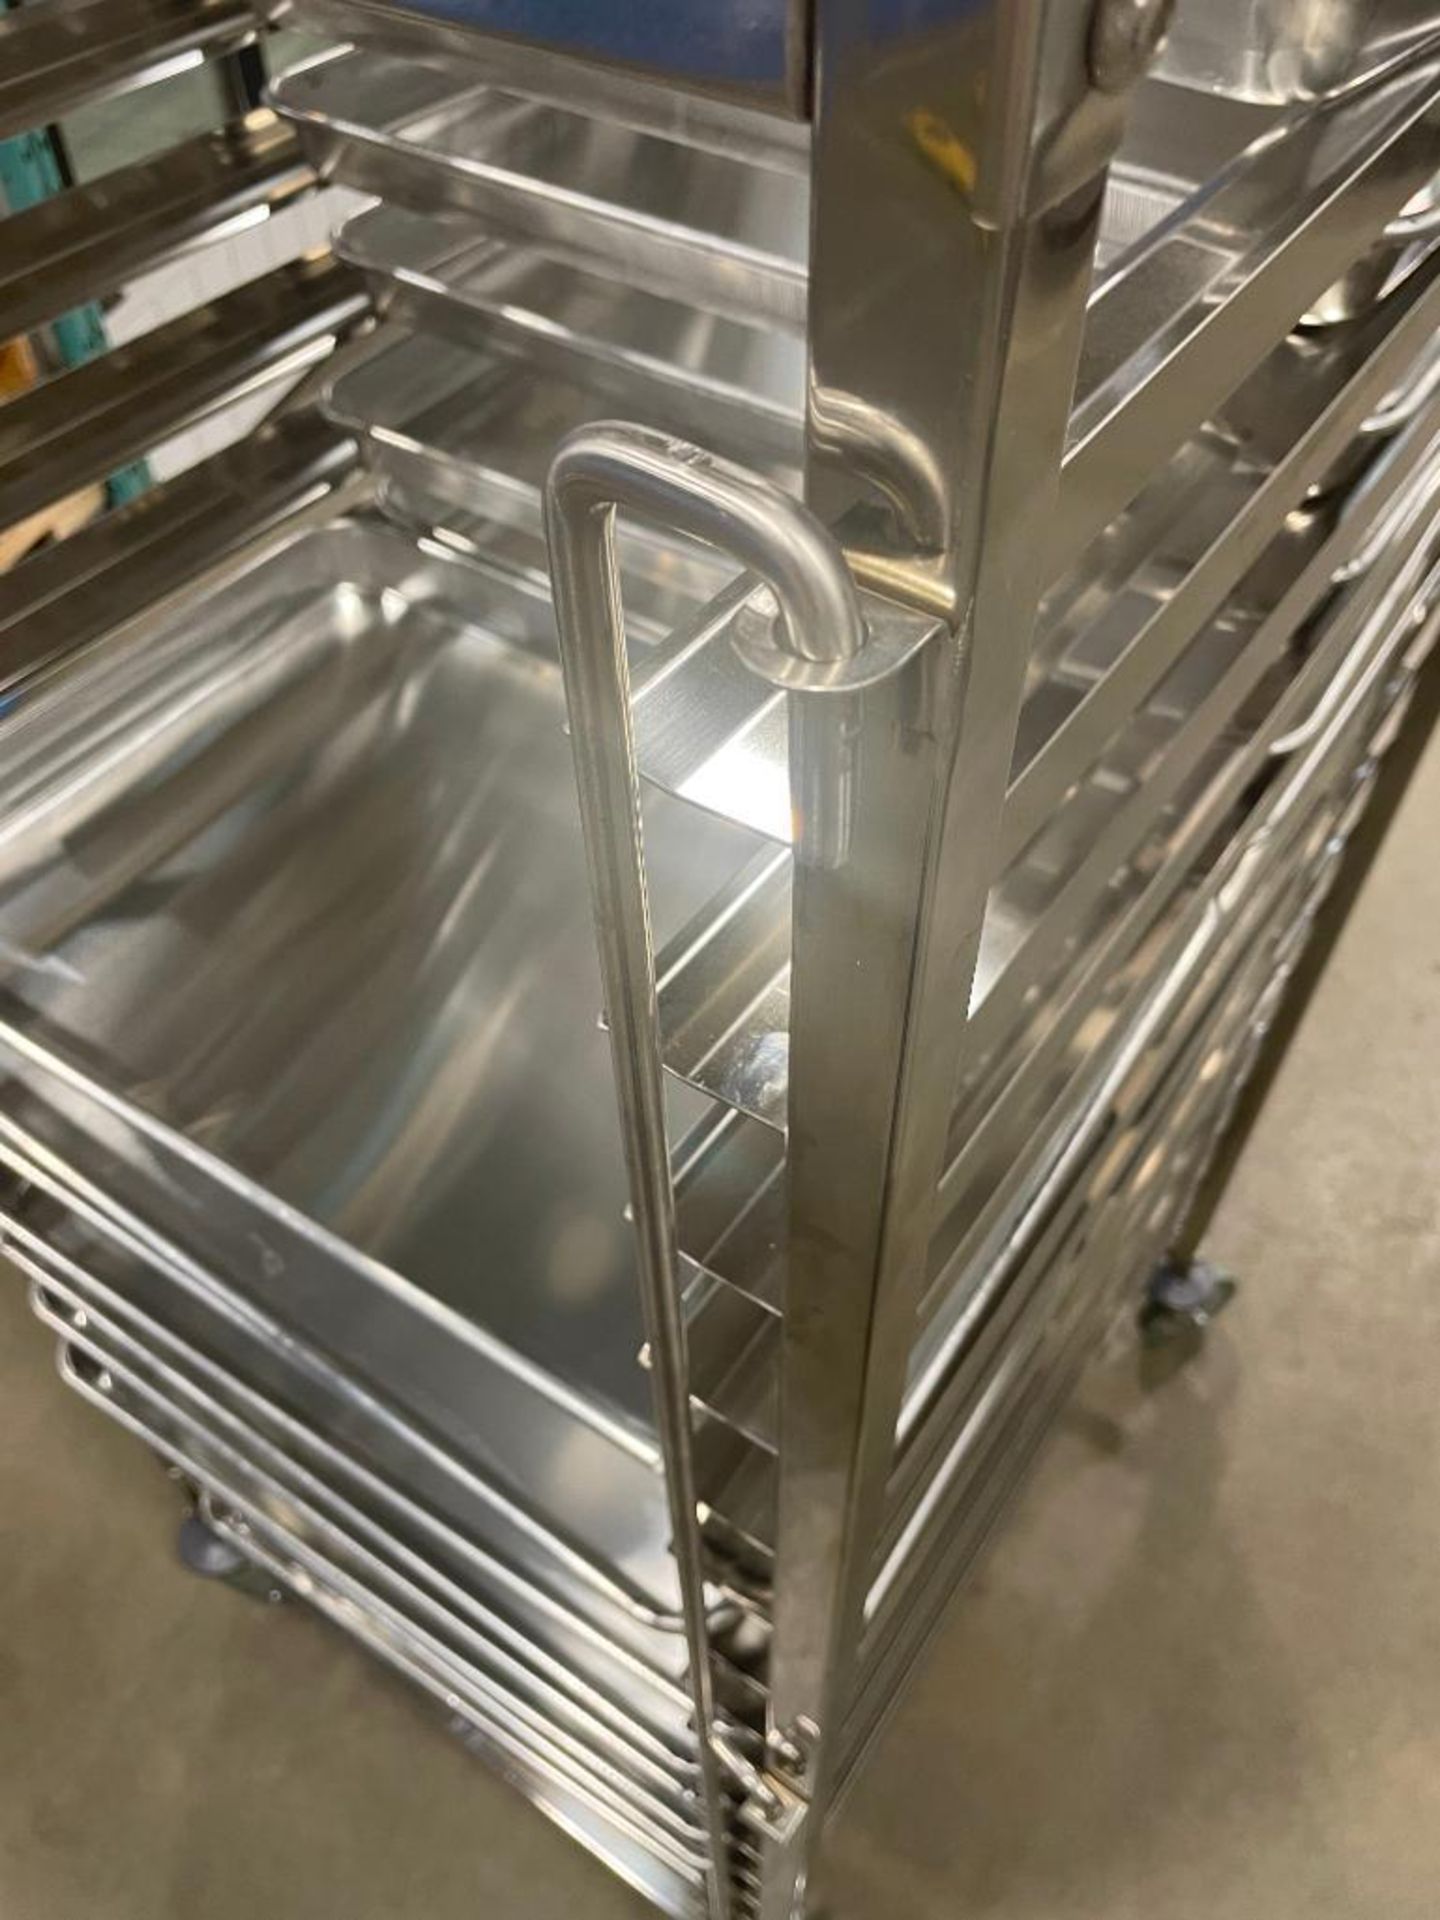 NEW STAINLESS STEEL 16-SLOT OVERSIZED BUN PAN RACK WITH PAN GUARD & (22) PANS - Image 7 of 8